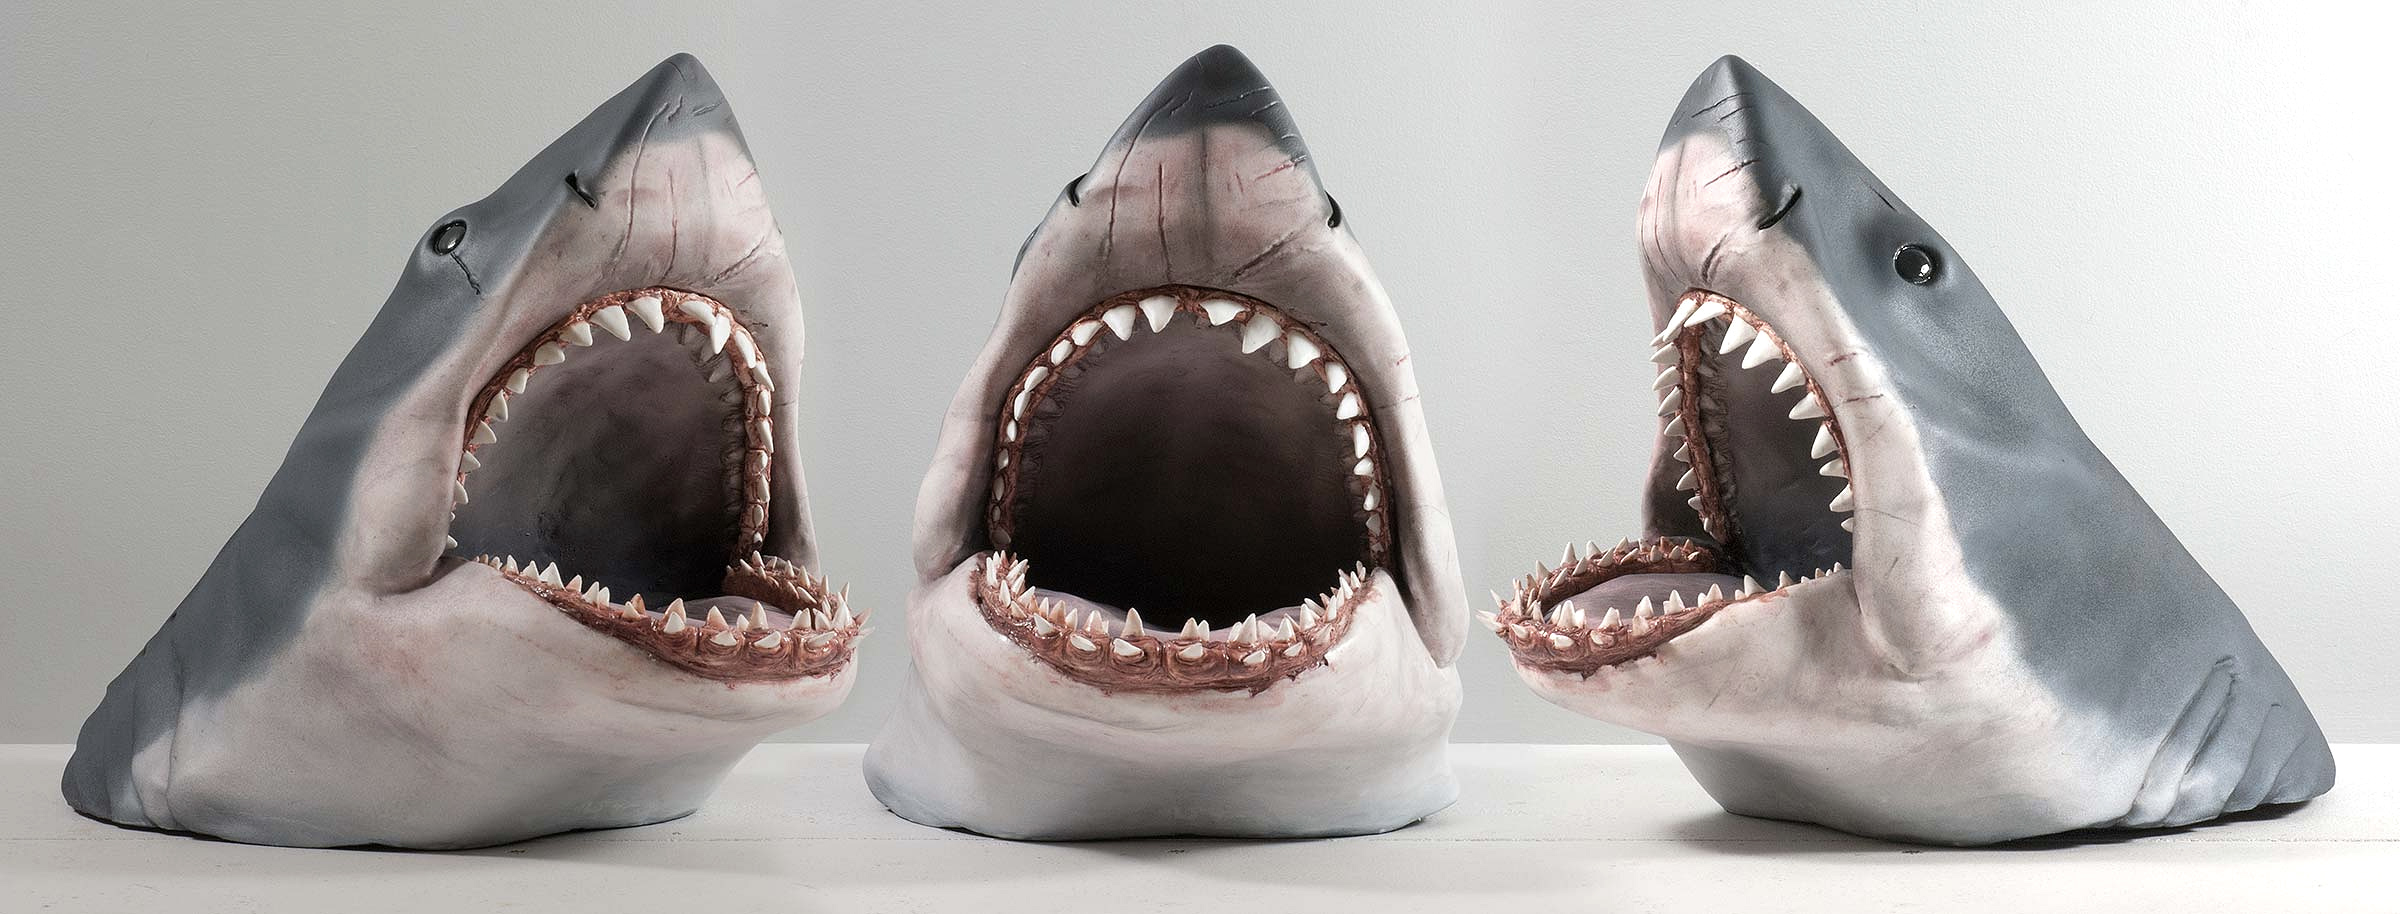 You Can Customise The Level Of Gore Detail On This Jaws Shark Bust